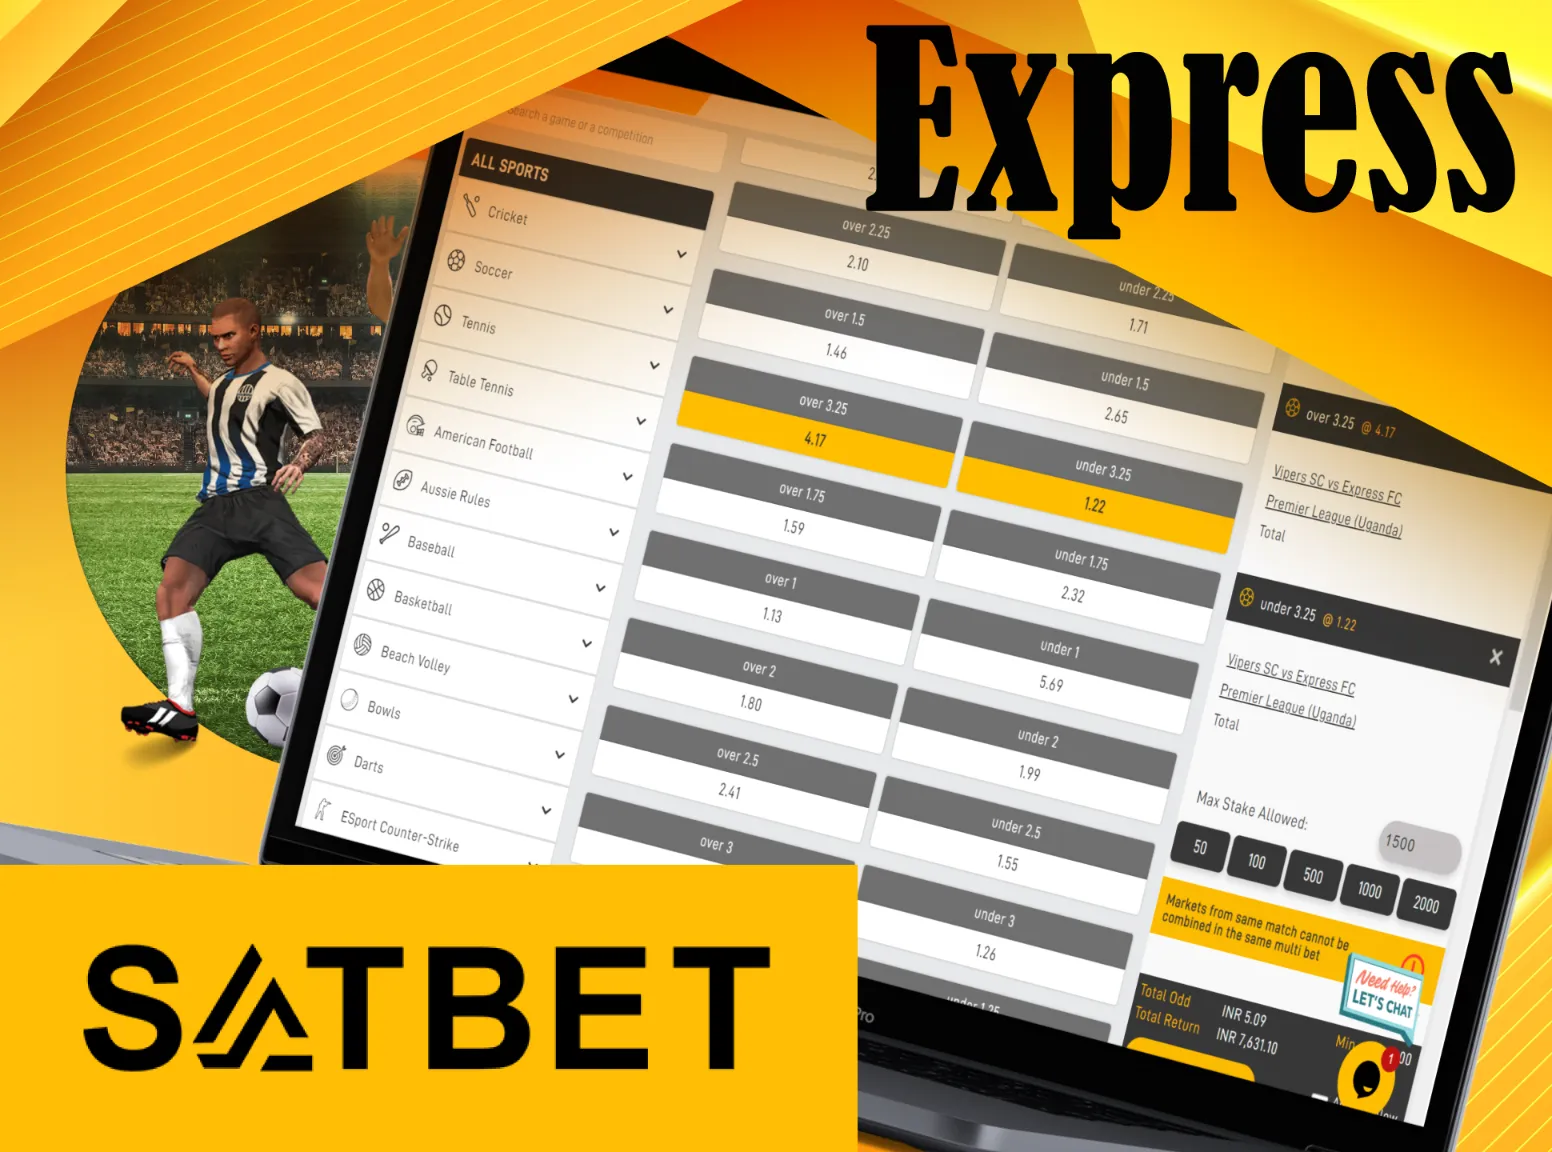 Make fast bets and get your winnings at Satbet.